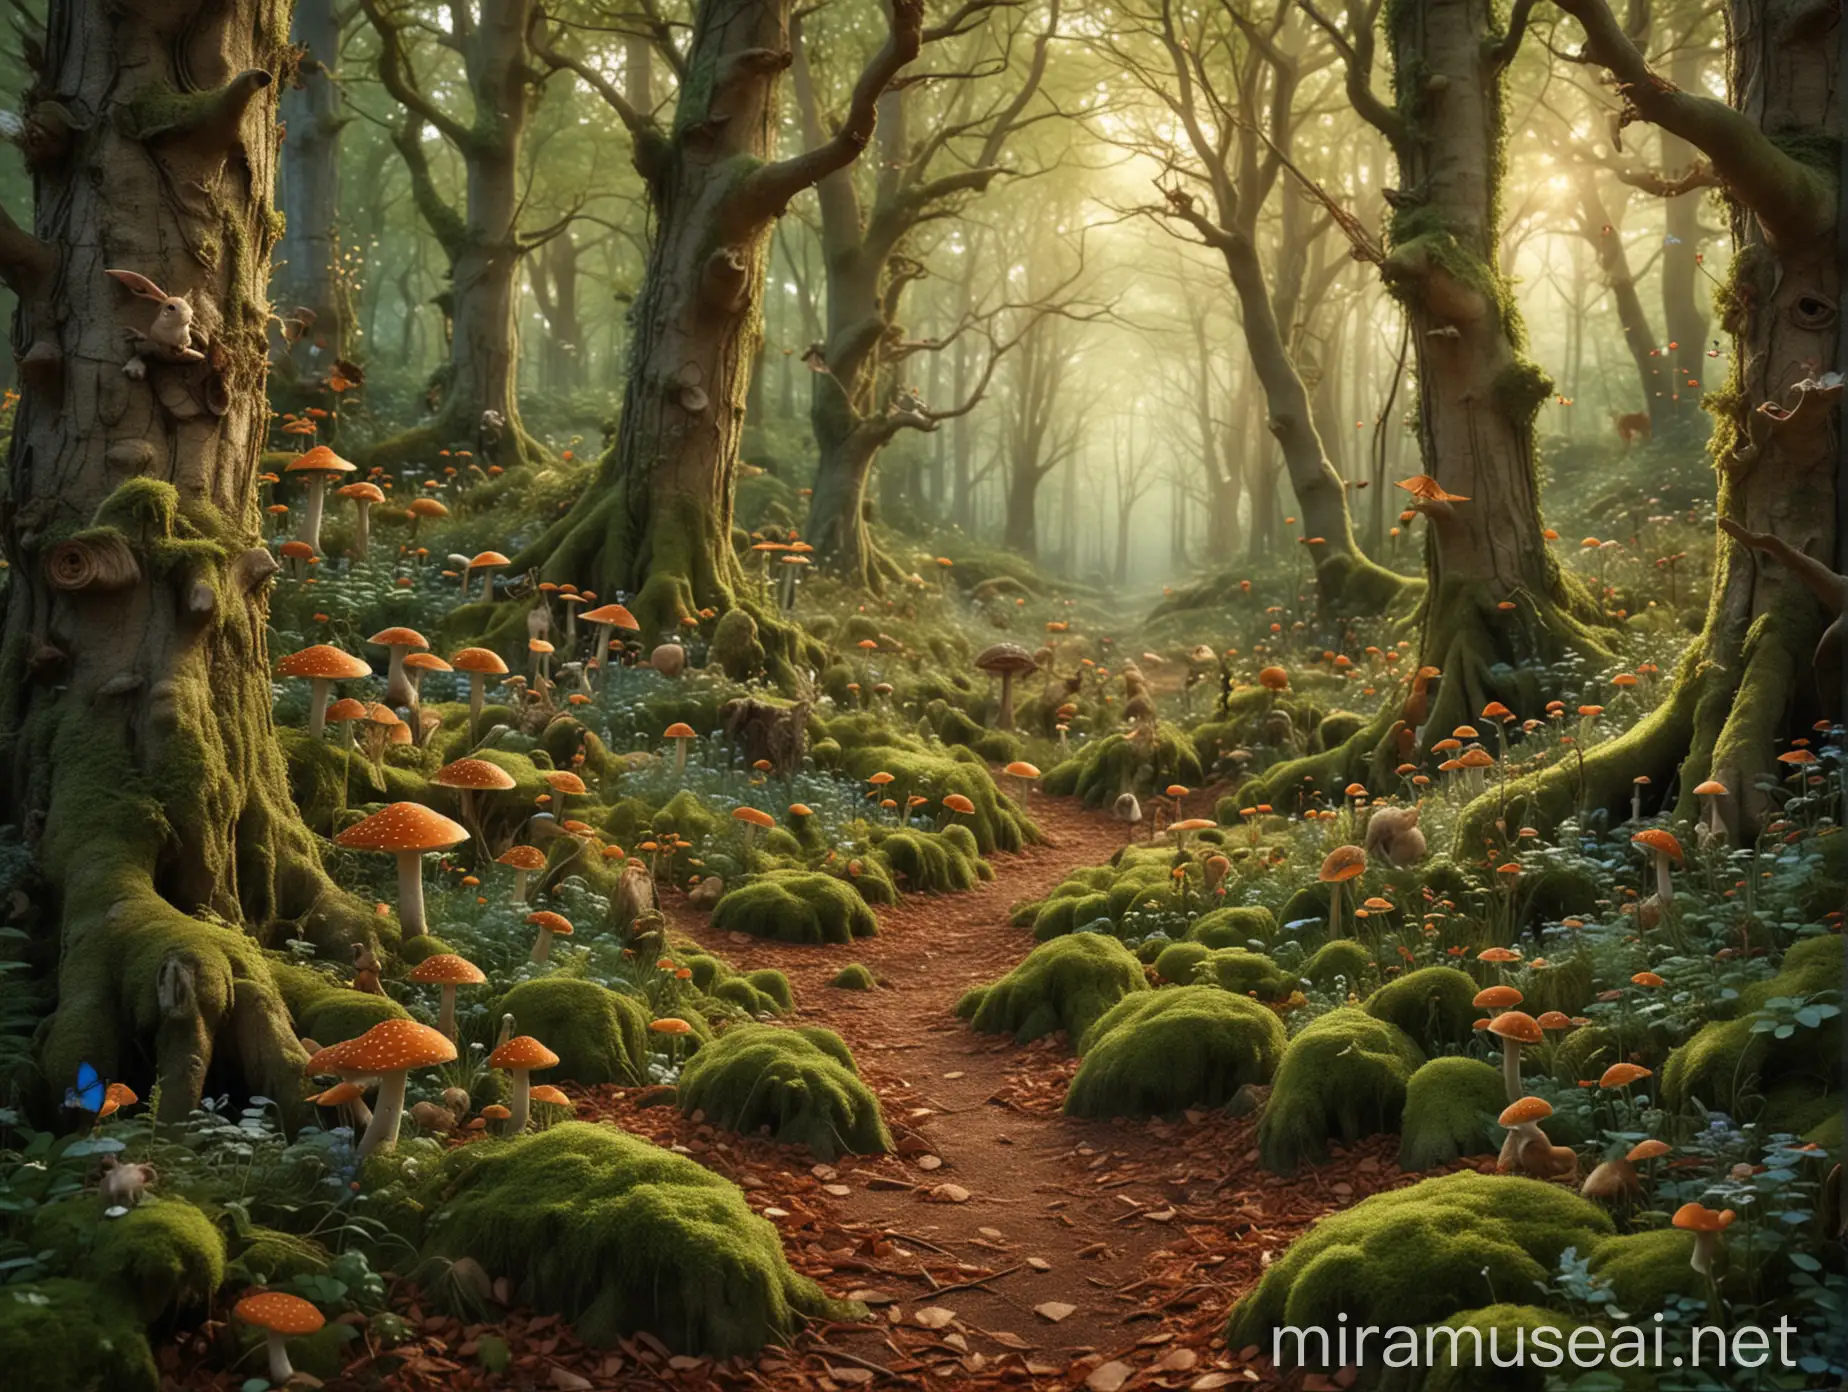 magical forest with small woodland creatures and gorgeous trees